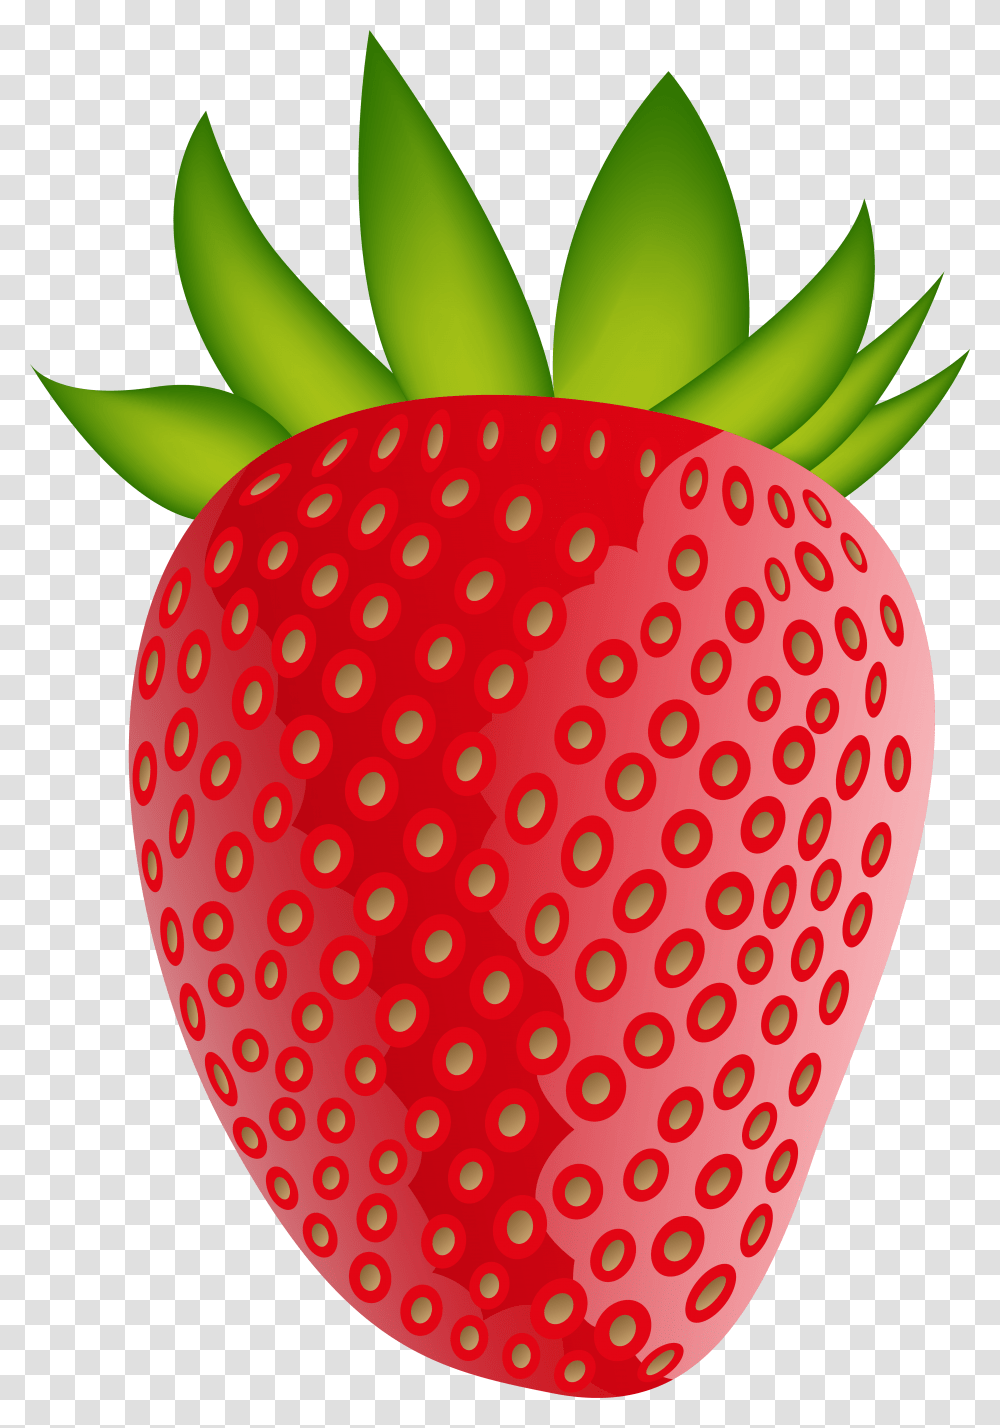 Background Strawberry Background Clipart Strawberry, Fruit, Plant, Food, Rug Transparent Png